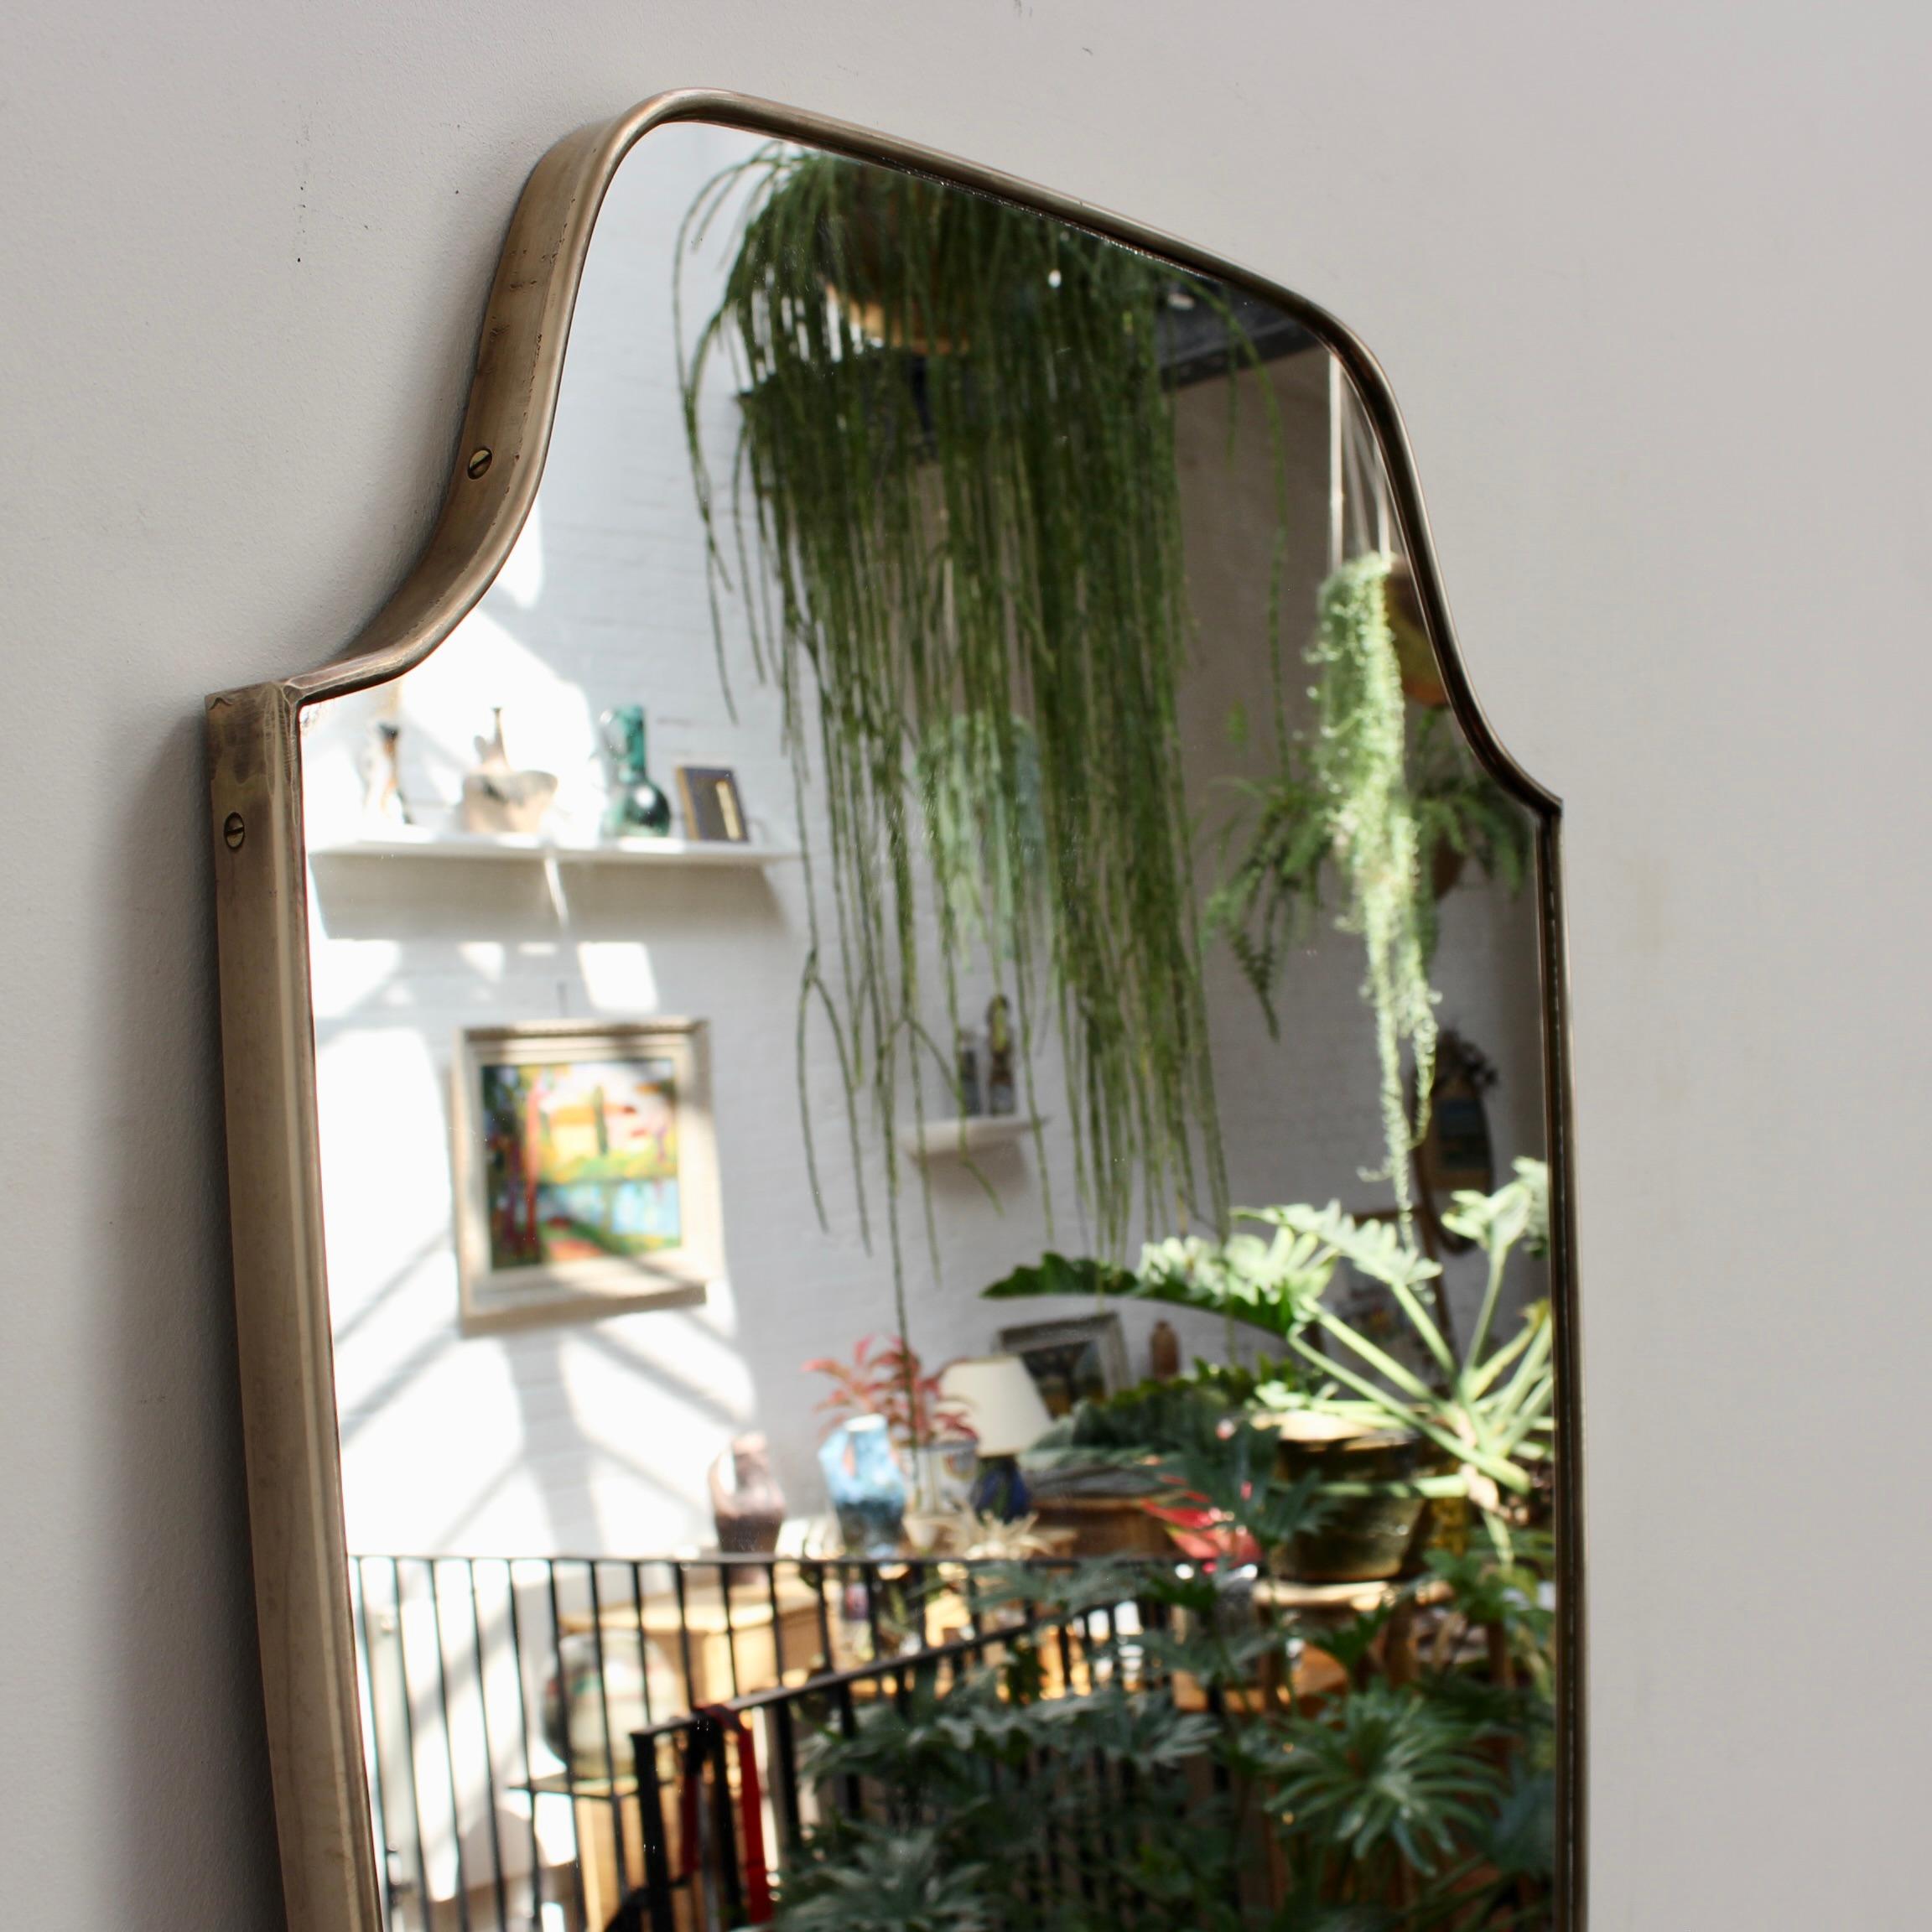 Vintage Italian Wall Mirror with Brass Frame, 'circa 1950s', Large 4